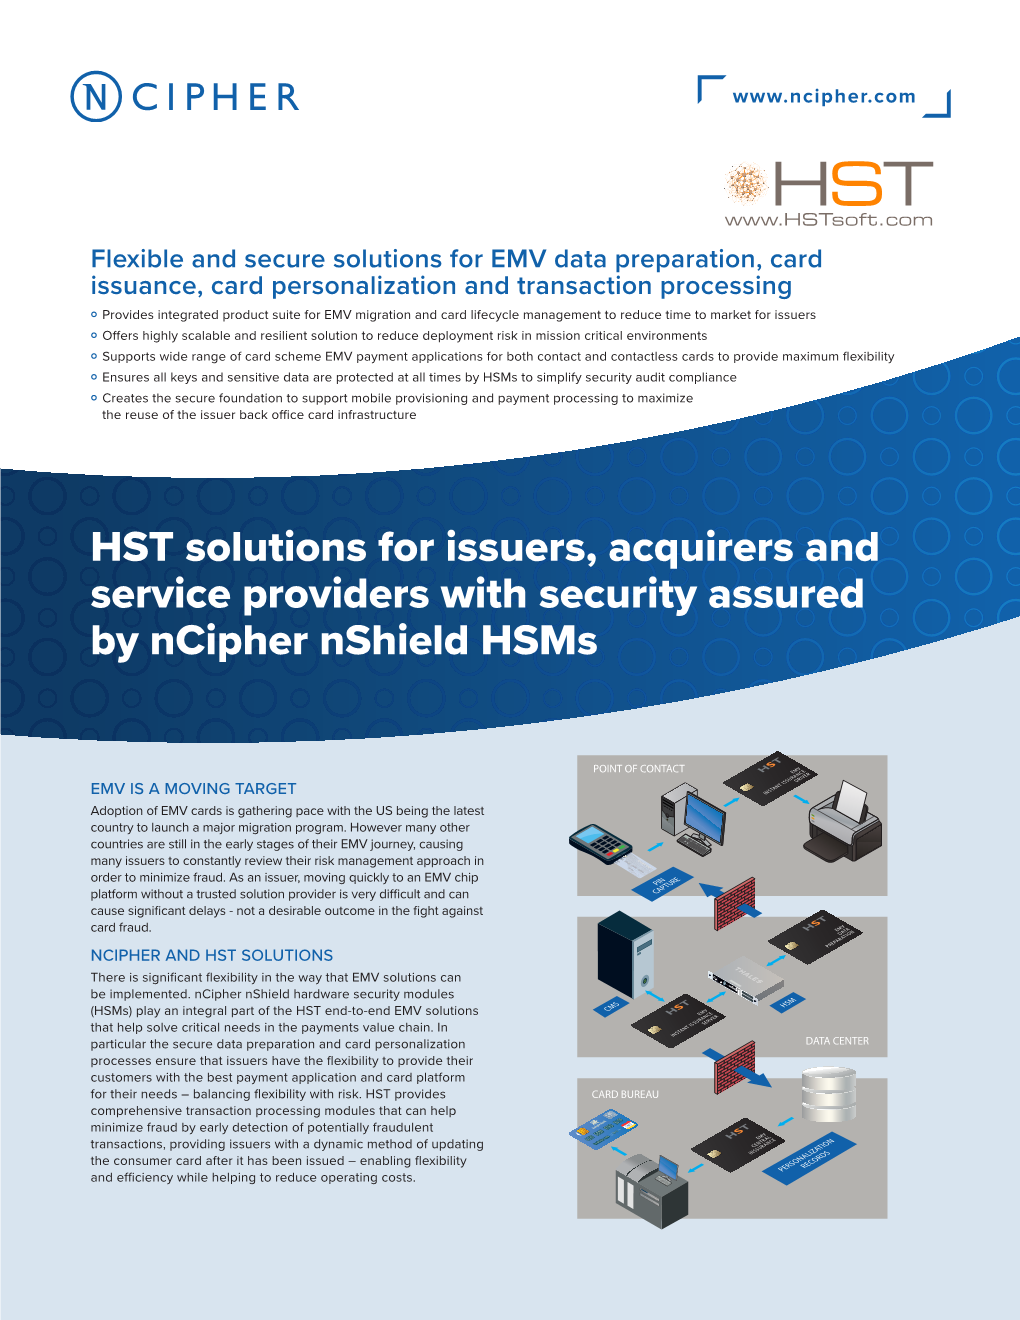 HST Solutions for Issuers, Acquirers and Service Providers with Security Assured by Ncipher Nshield Hsms